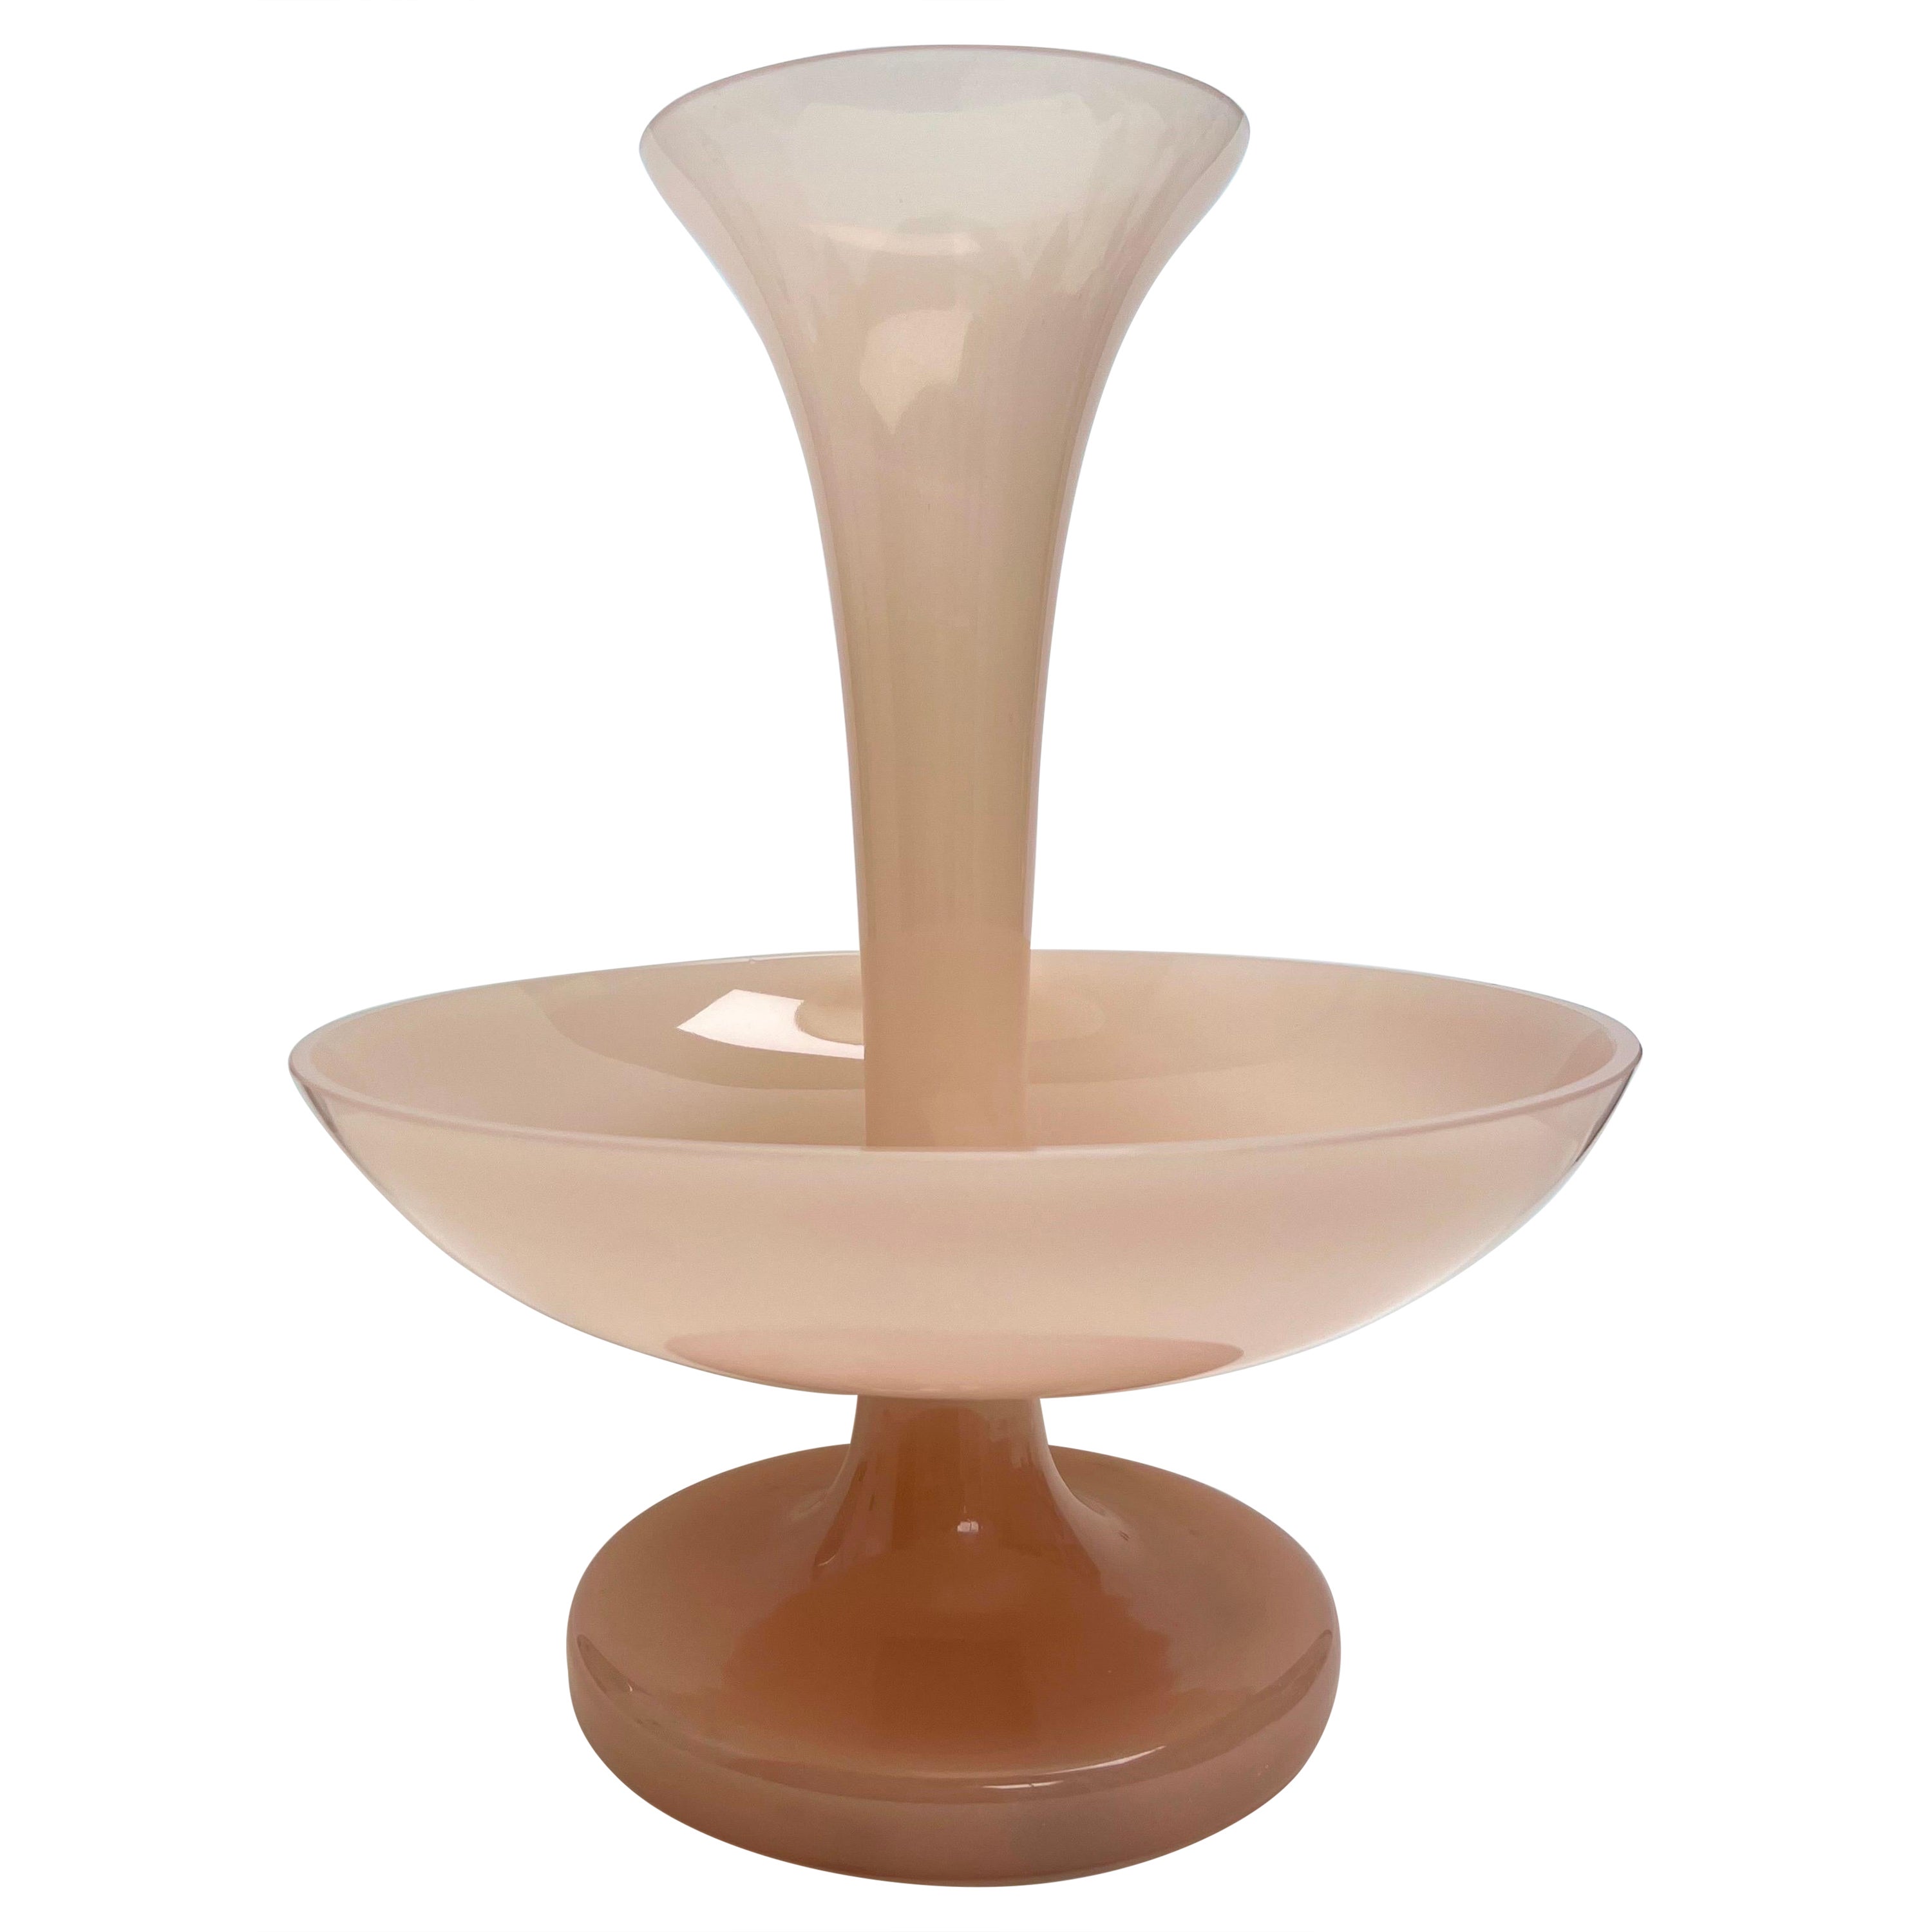 Epergne French Opaline Art Déco